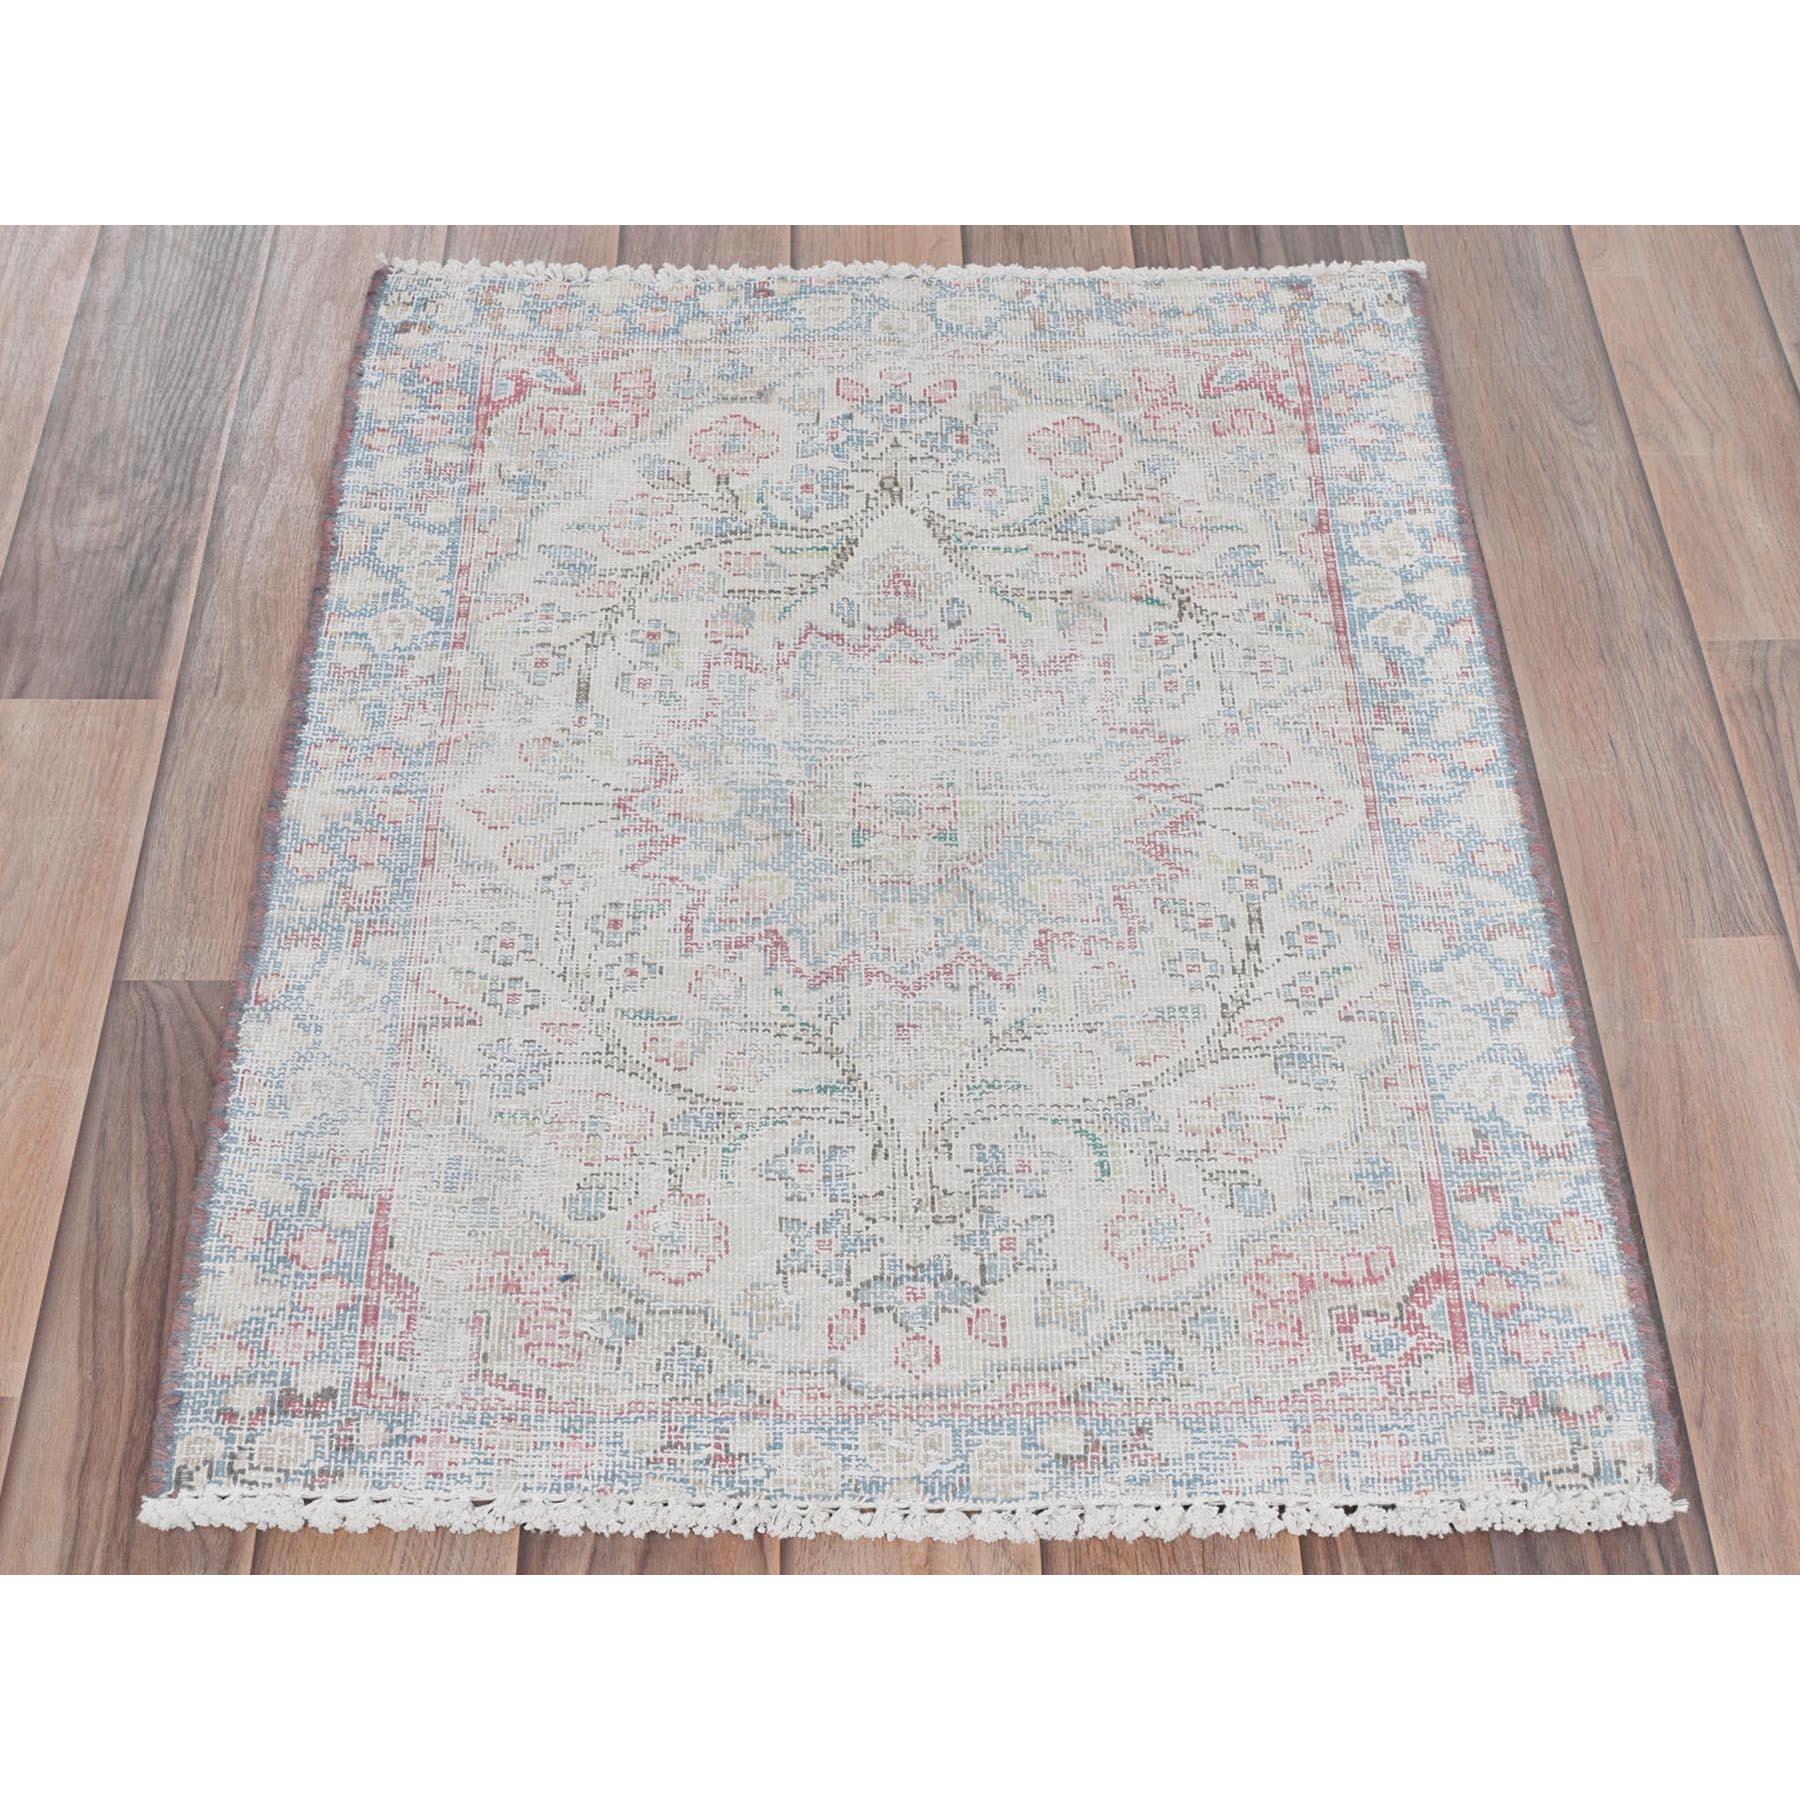 This fabulous hand-knotted carpet has been created and designed for extra strength and durability. This rug has been handcrafted for weeks in the traditional method that is used to make
Exact Rug Size in Feet and Inches : 1'10